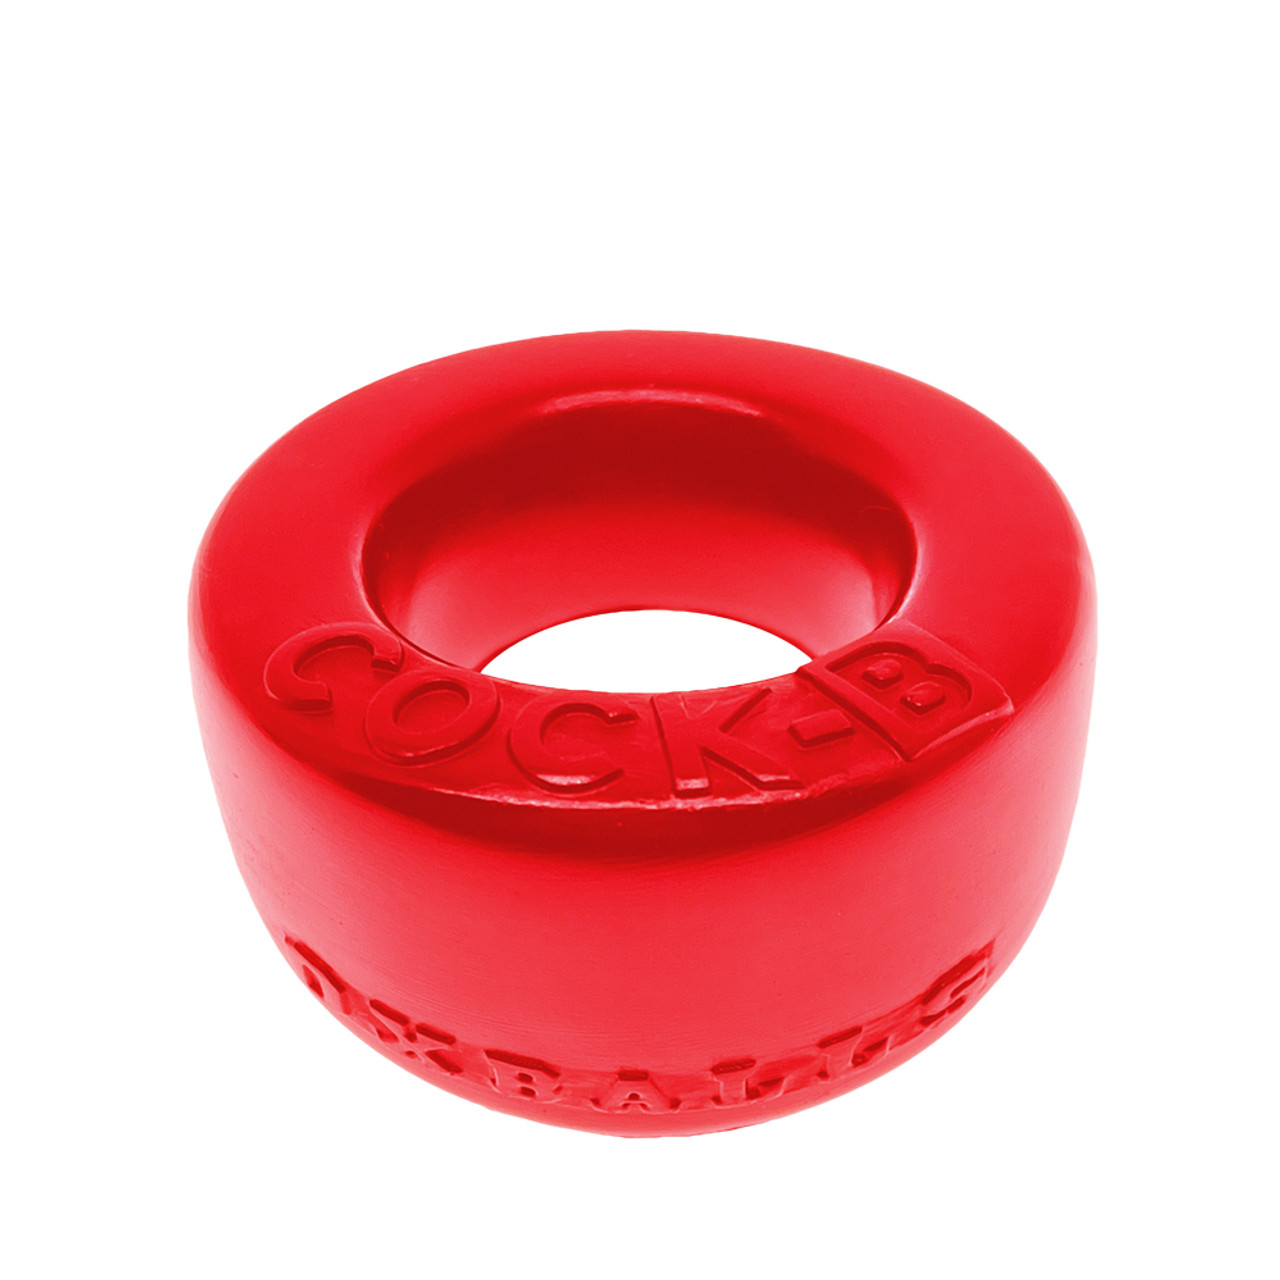 https://cdn11.bigcommerce.com/s-rph88/images/stencil/1280x1280/products/24519/229821/oxballs-cock-b-bulge-liquid-platinum-silicone-padded-cockring-red-2__23250.1633029768.jpg?c=2